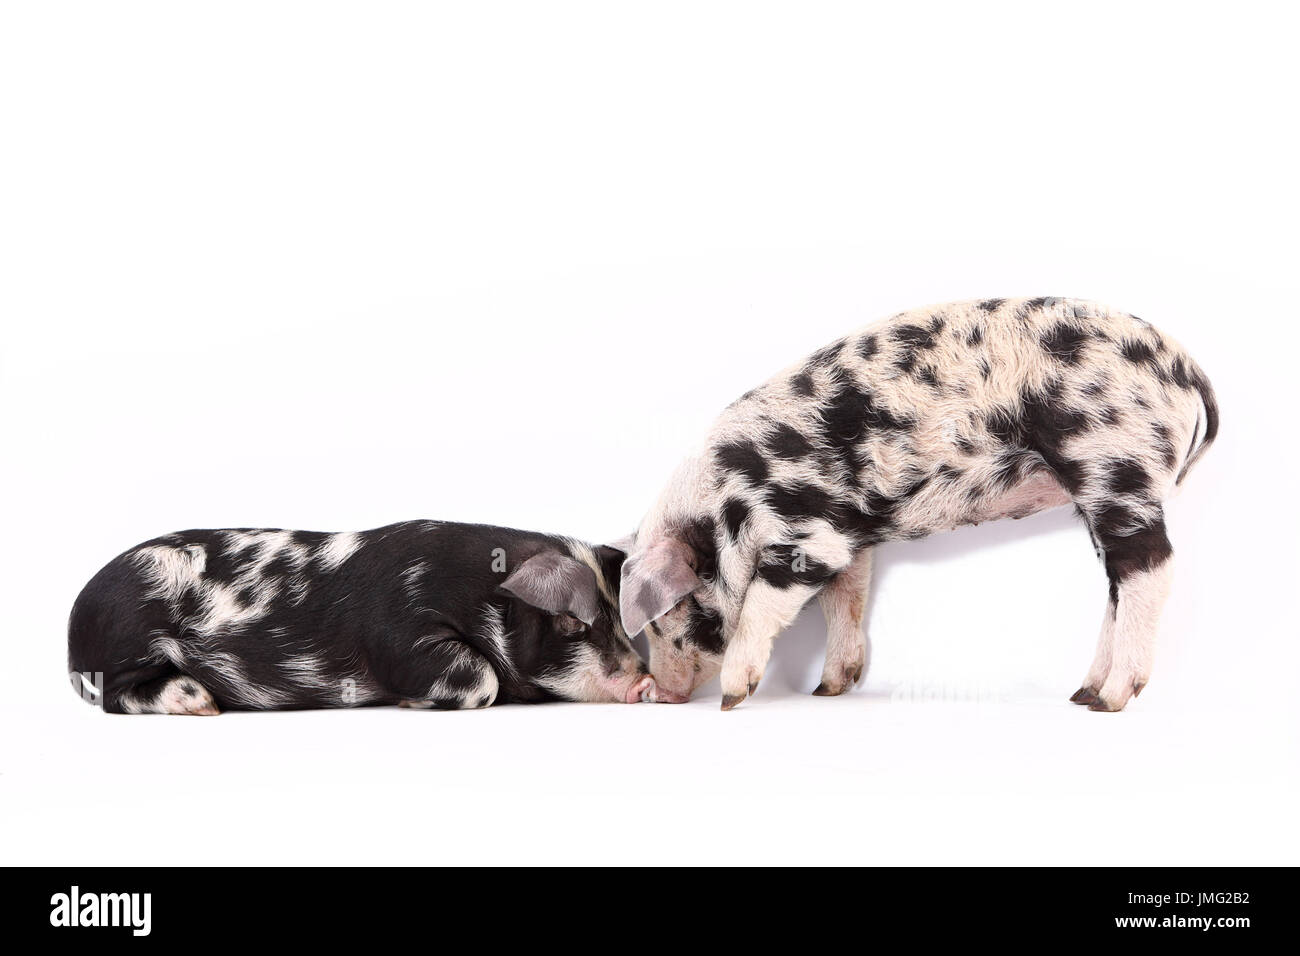 Turopolje Pig. Two piglets: one standing, one lying. Studio picture against a white background. Germany Stock Photo